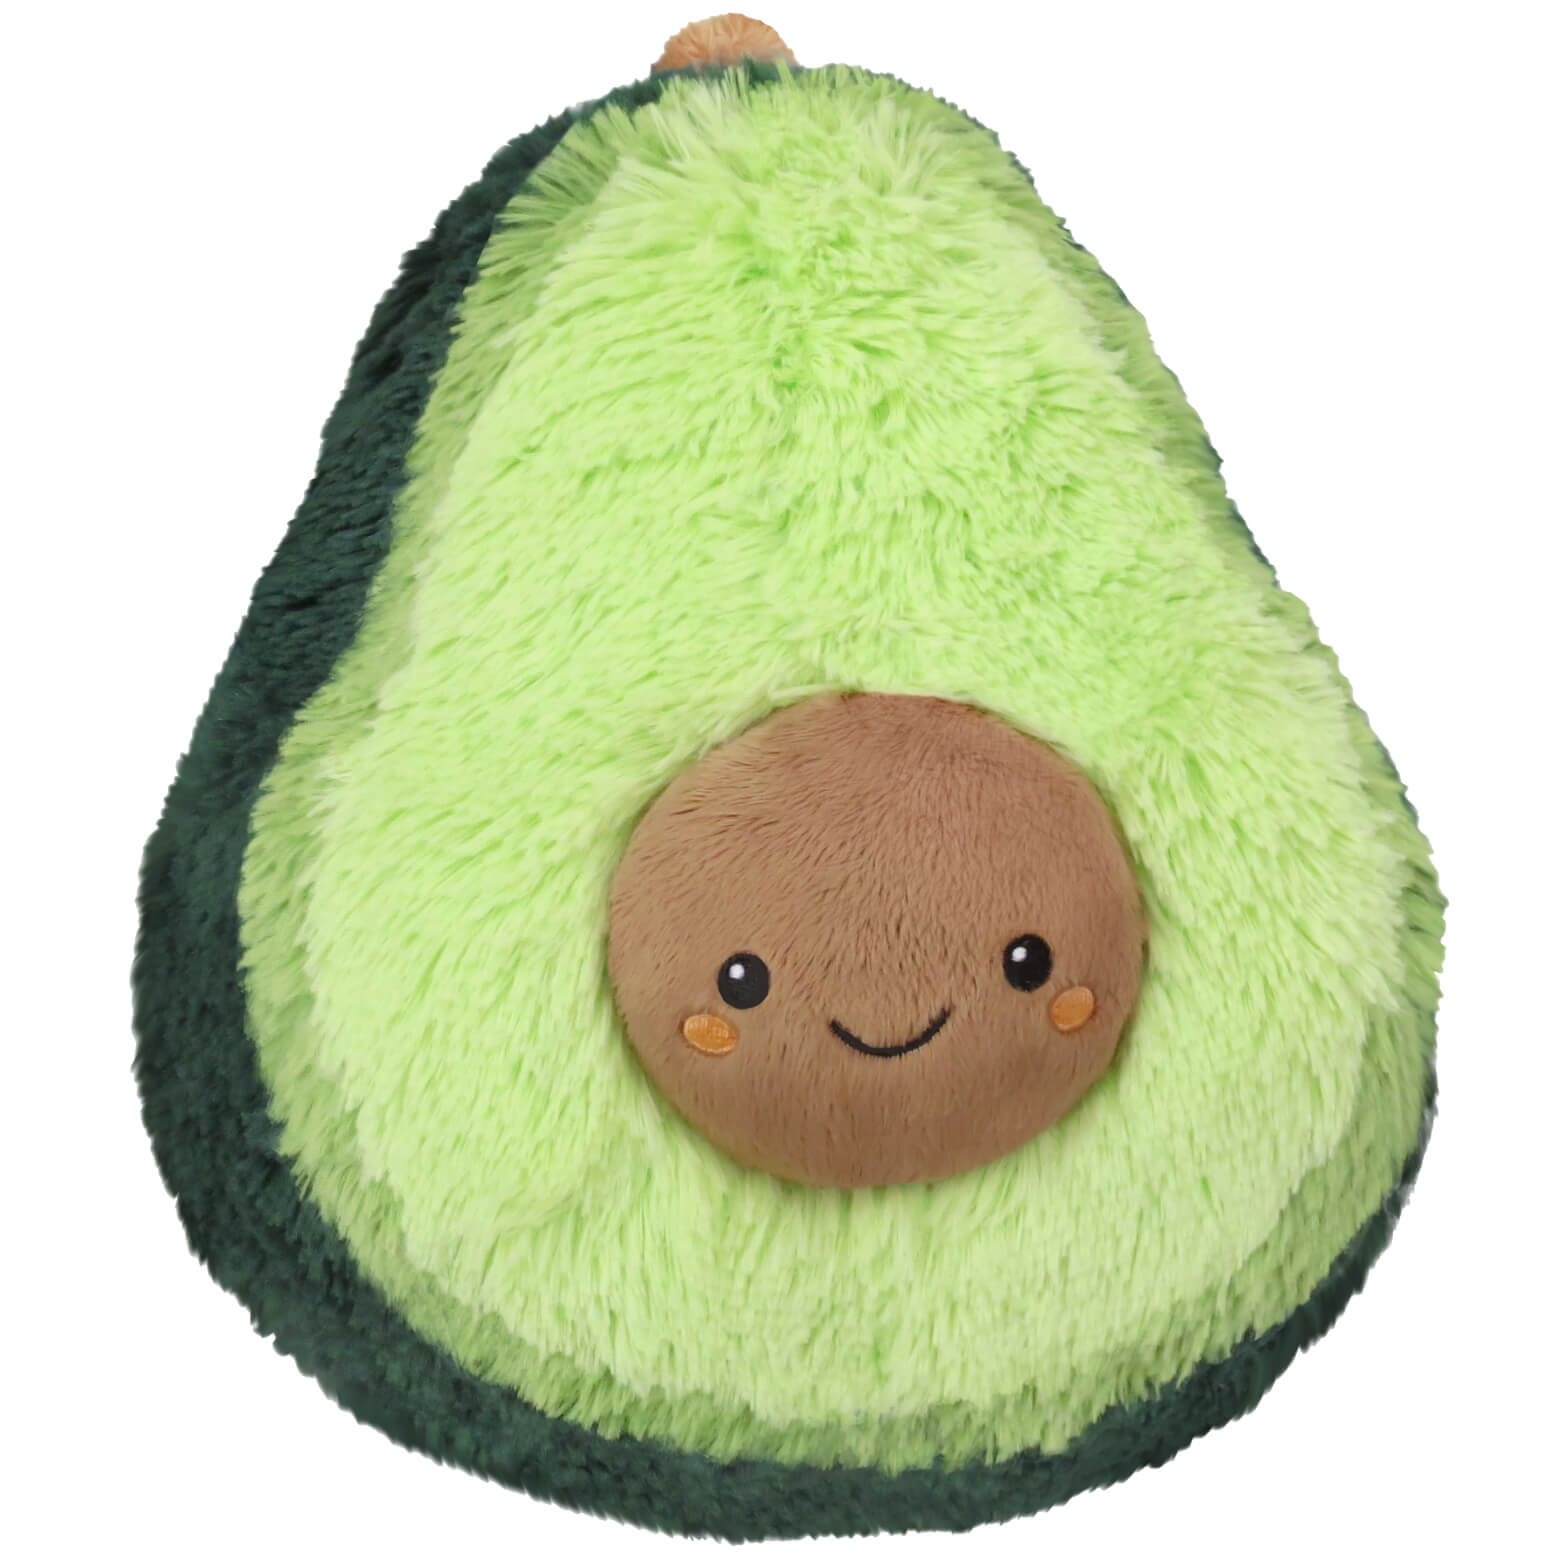 Squishables Mini Avocado is green with a tan smiley face.